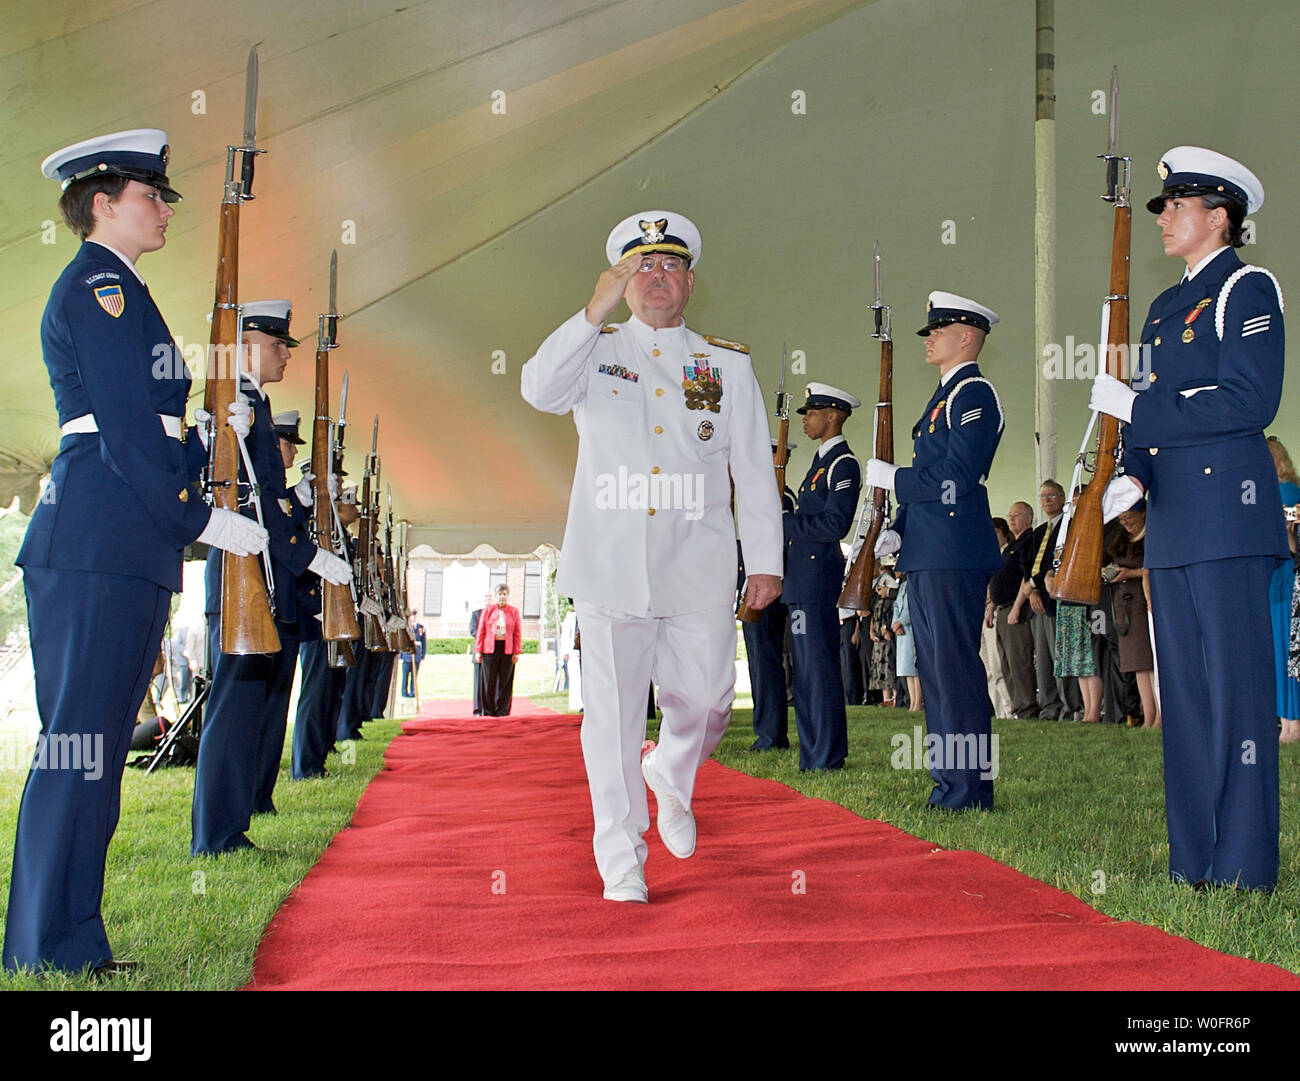 Outgoing Coast Guard Commandant Adm. Thad W. Allen salutes the flag as he enters his change of command ceremony at Ft. McNair in Washington on May 25, 2010. Adm. Robert J. Papp Jr., relieved Allen and assumed command as Commandant of the Coast Guard.  UPI/Isaac Pacheco Stock Photo